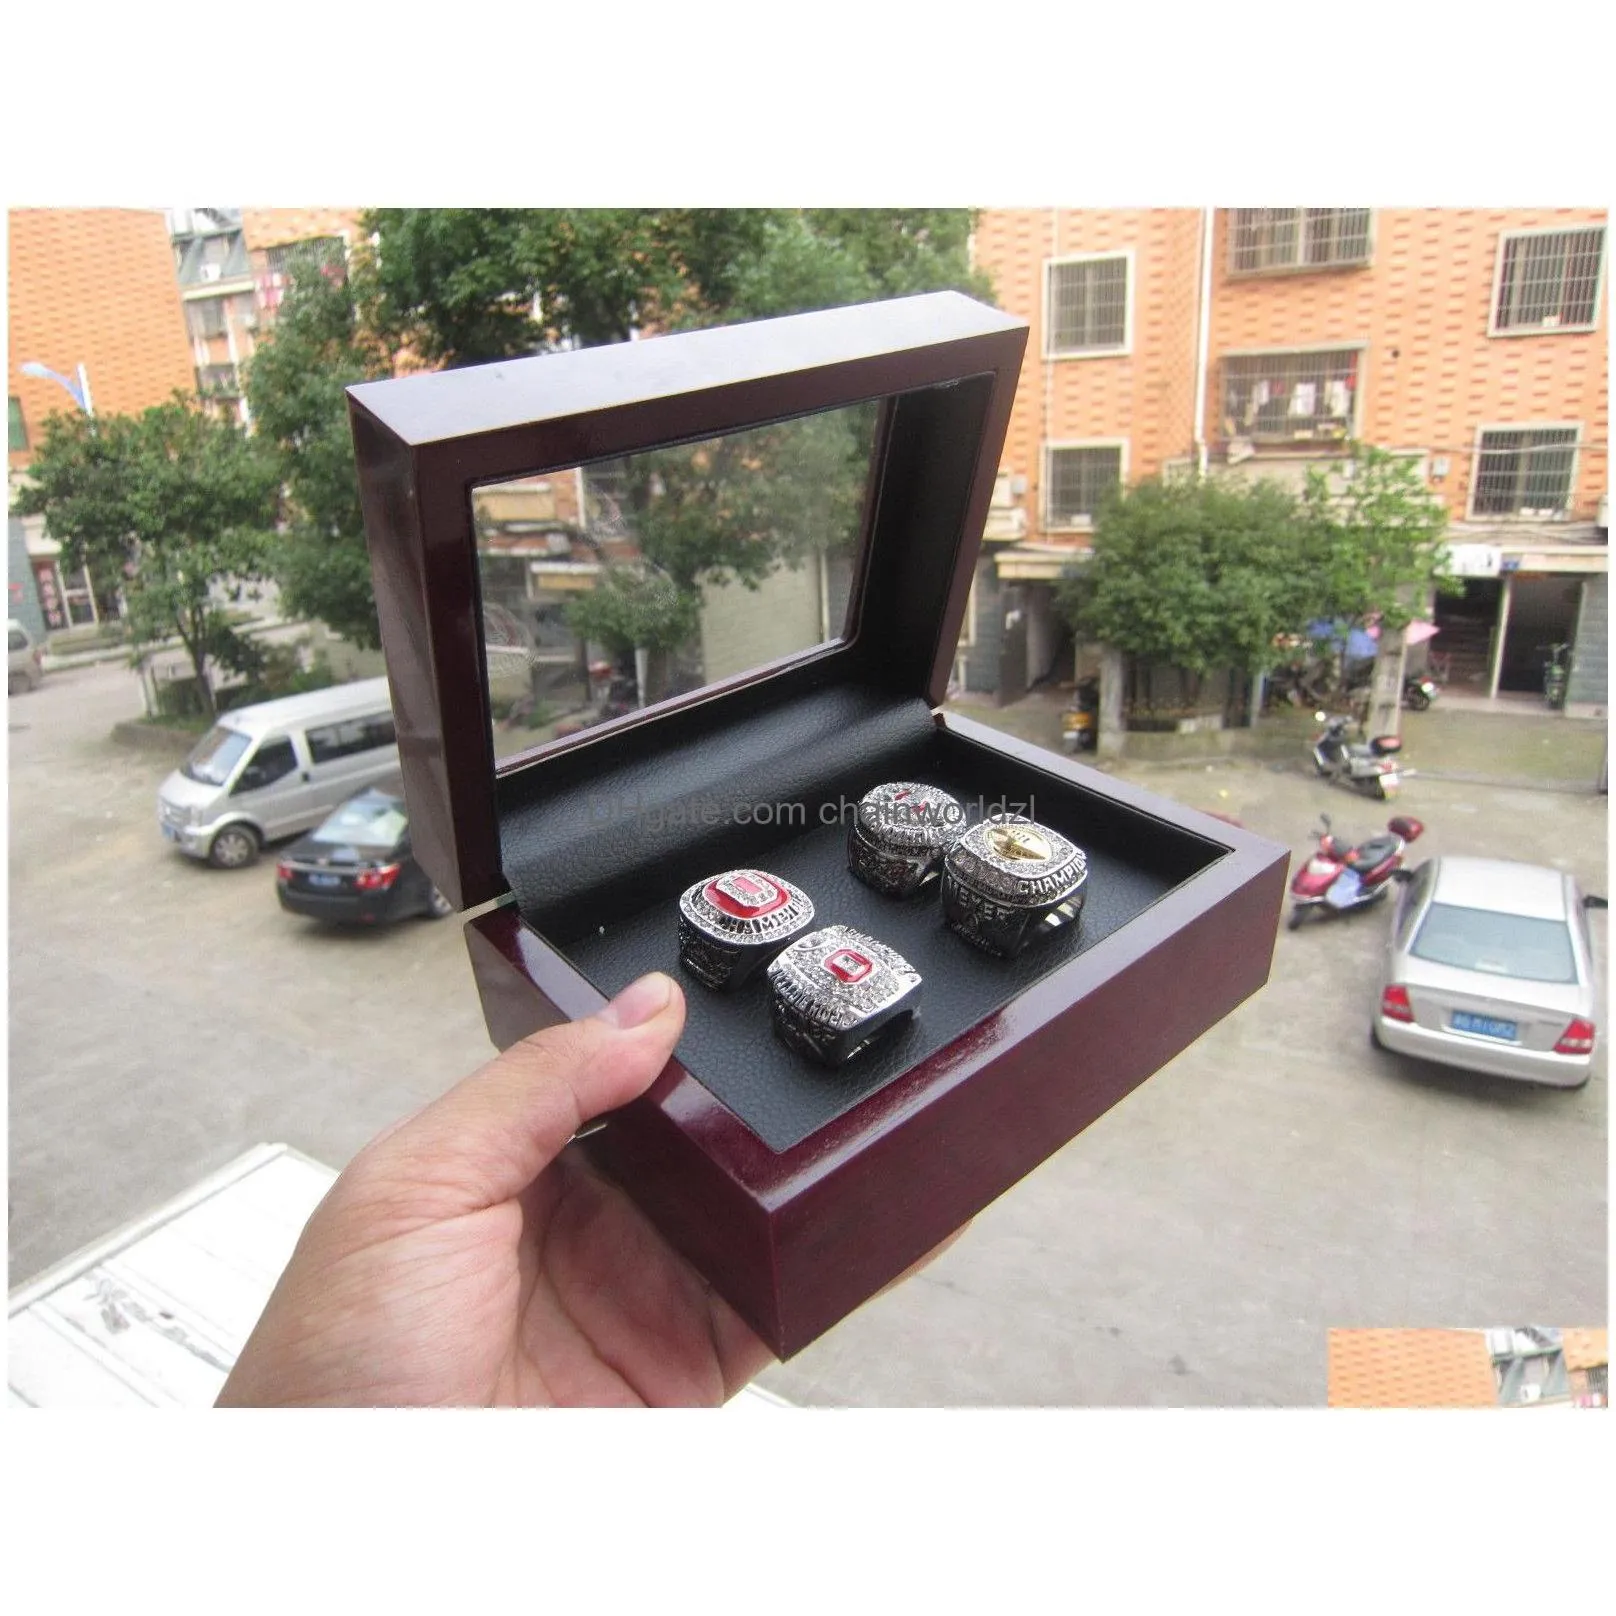 ohio state 4pcs football national championship ring with wooden display box souvenir men fan gift wholesale drop 